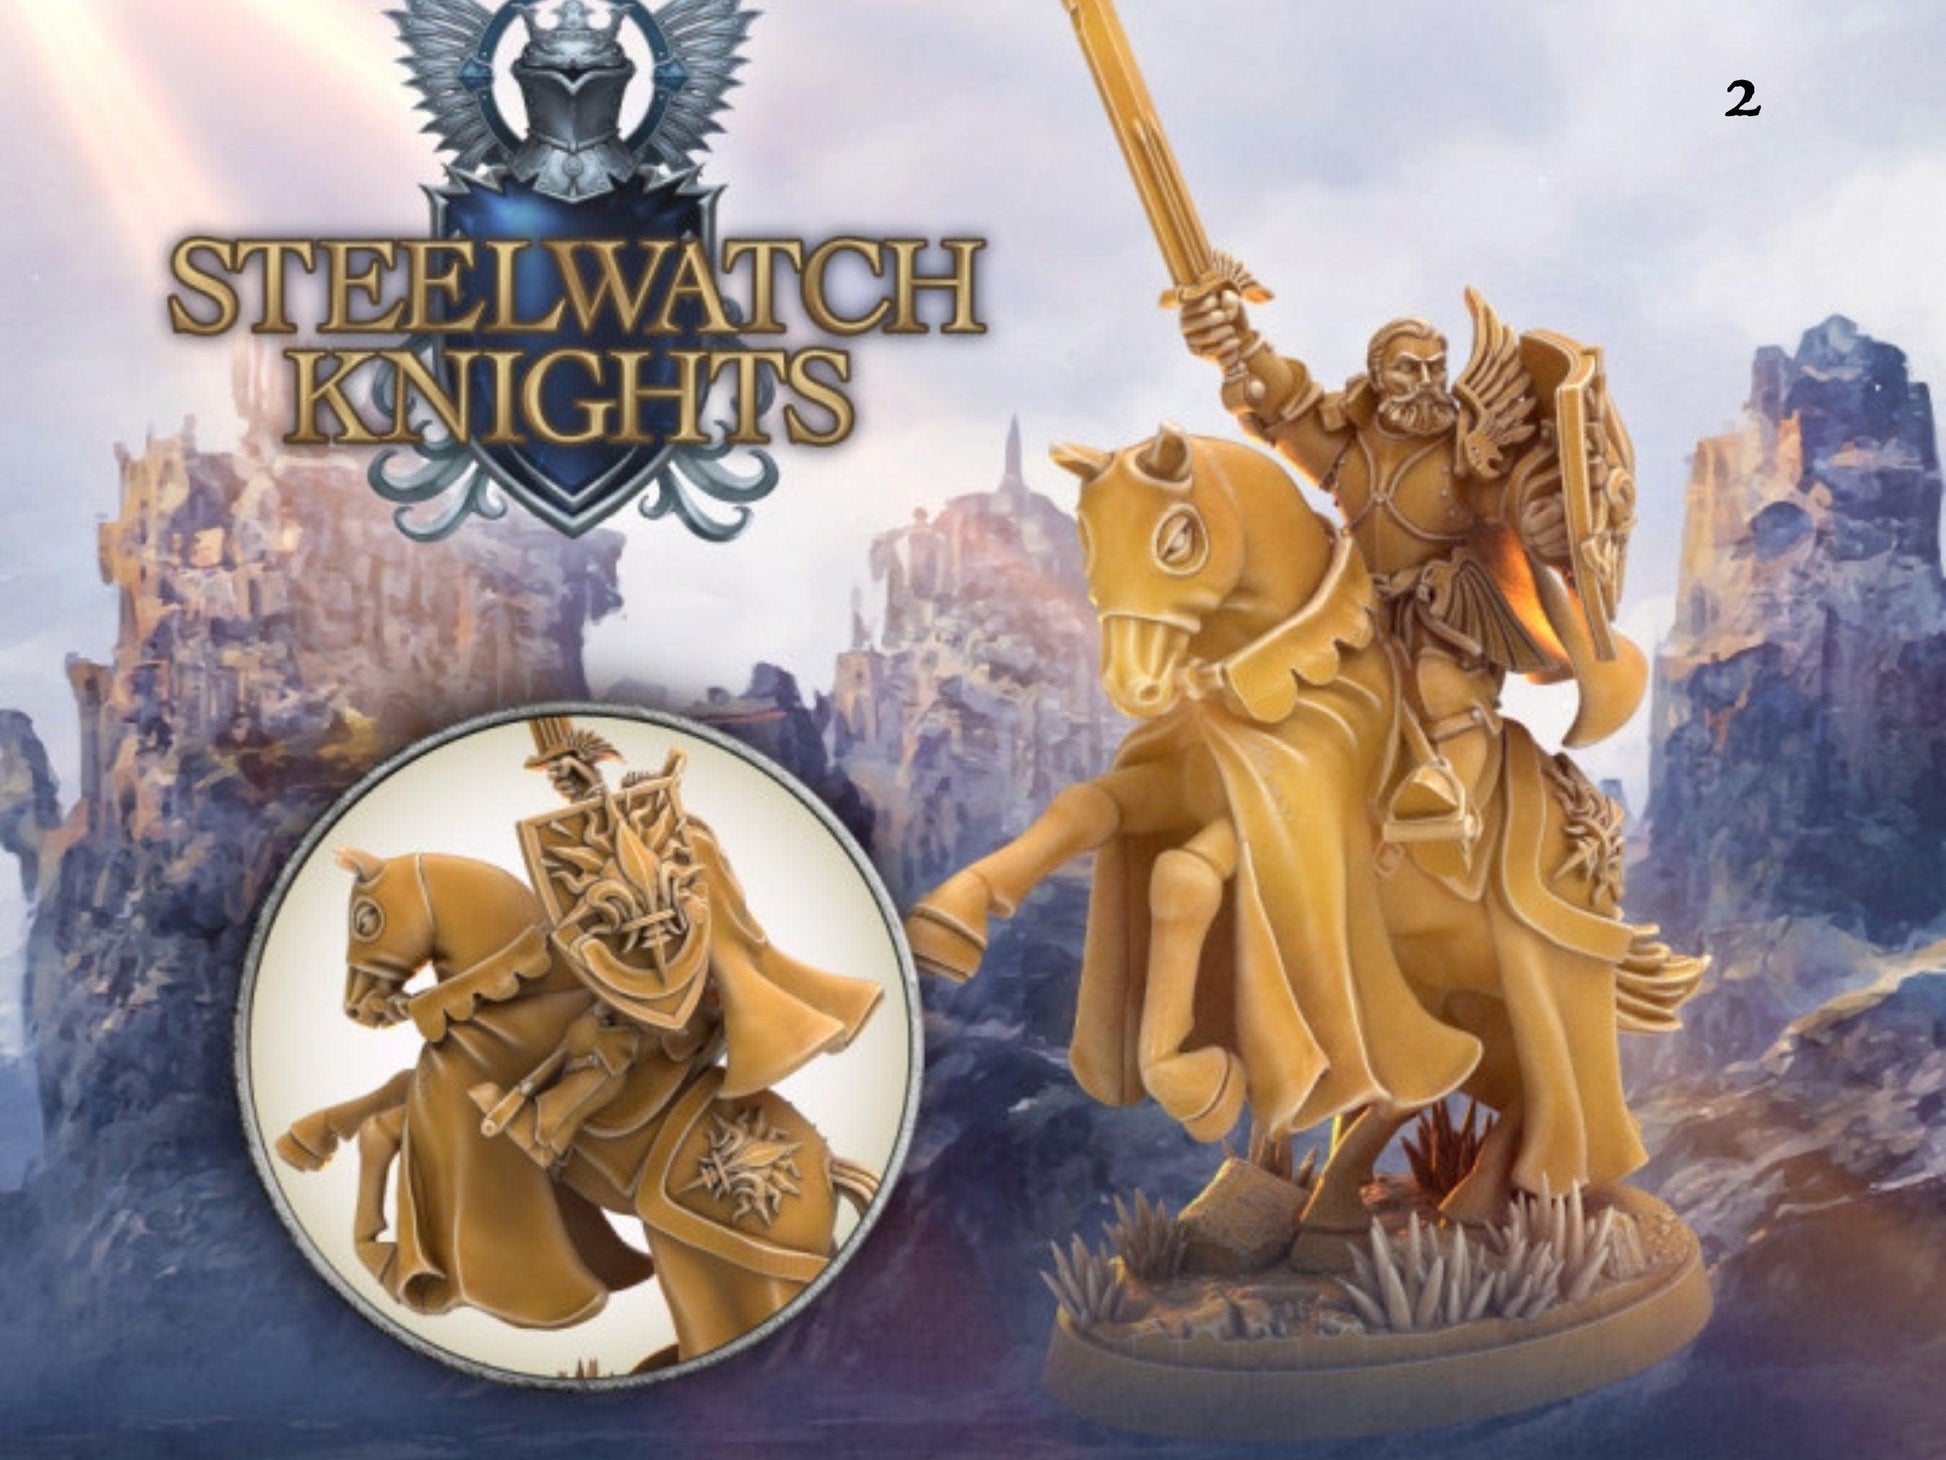 Mounted Paladin miniature Steelwatch | Dragon's Forge | 28mm Scale | DnD Miniature | Dungeons and Dragons | Paladin knight - Plague Miniatures shop for DnD Miniatures